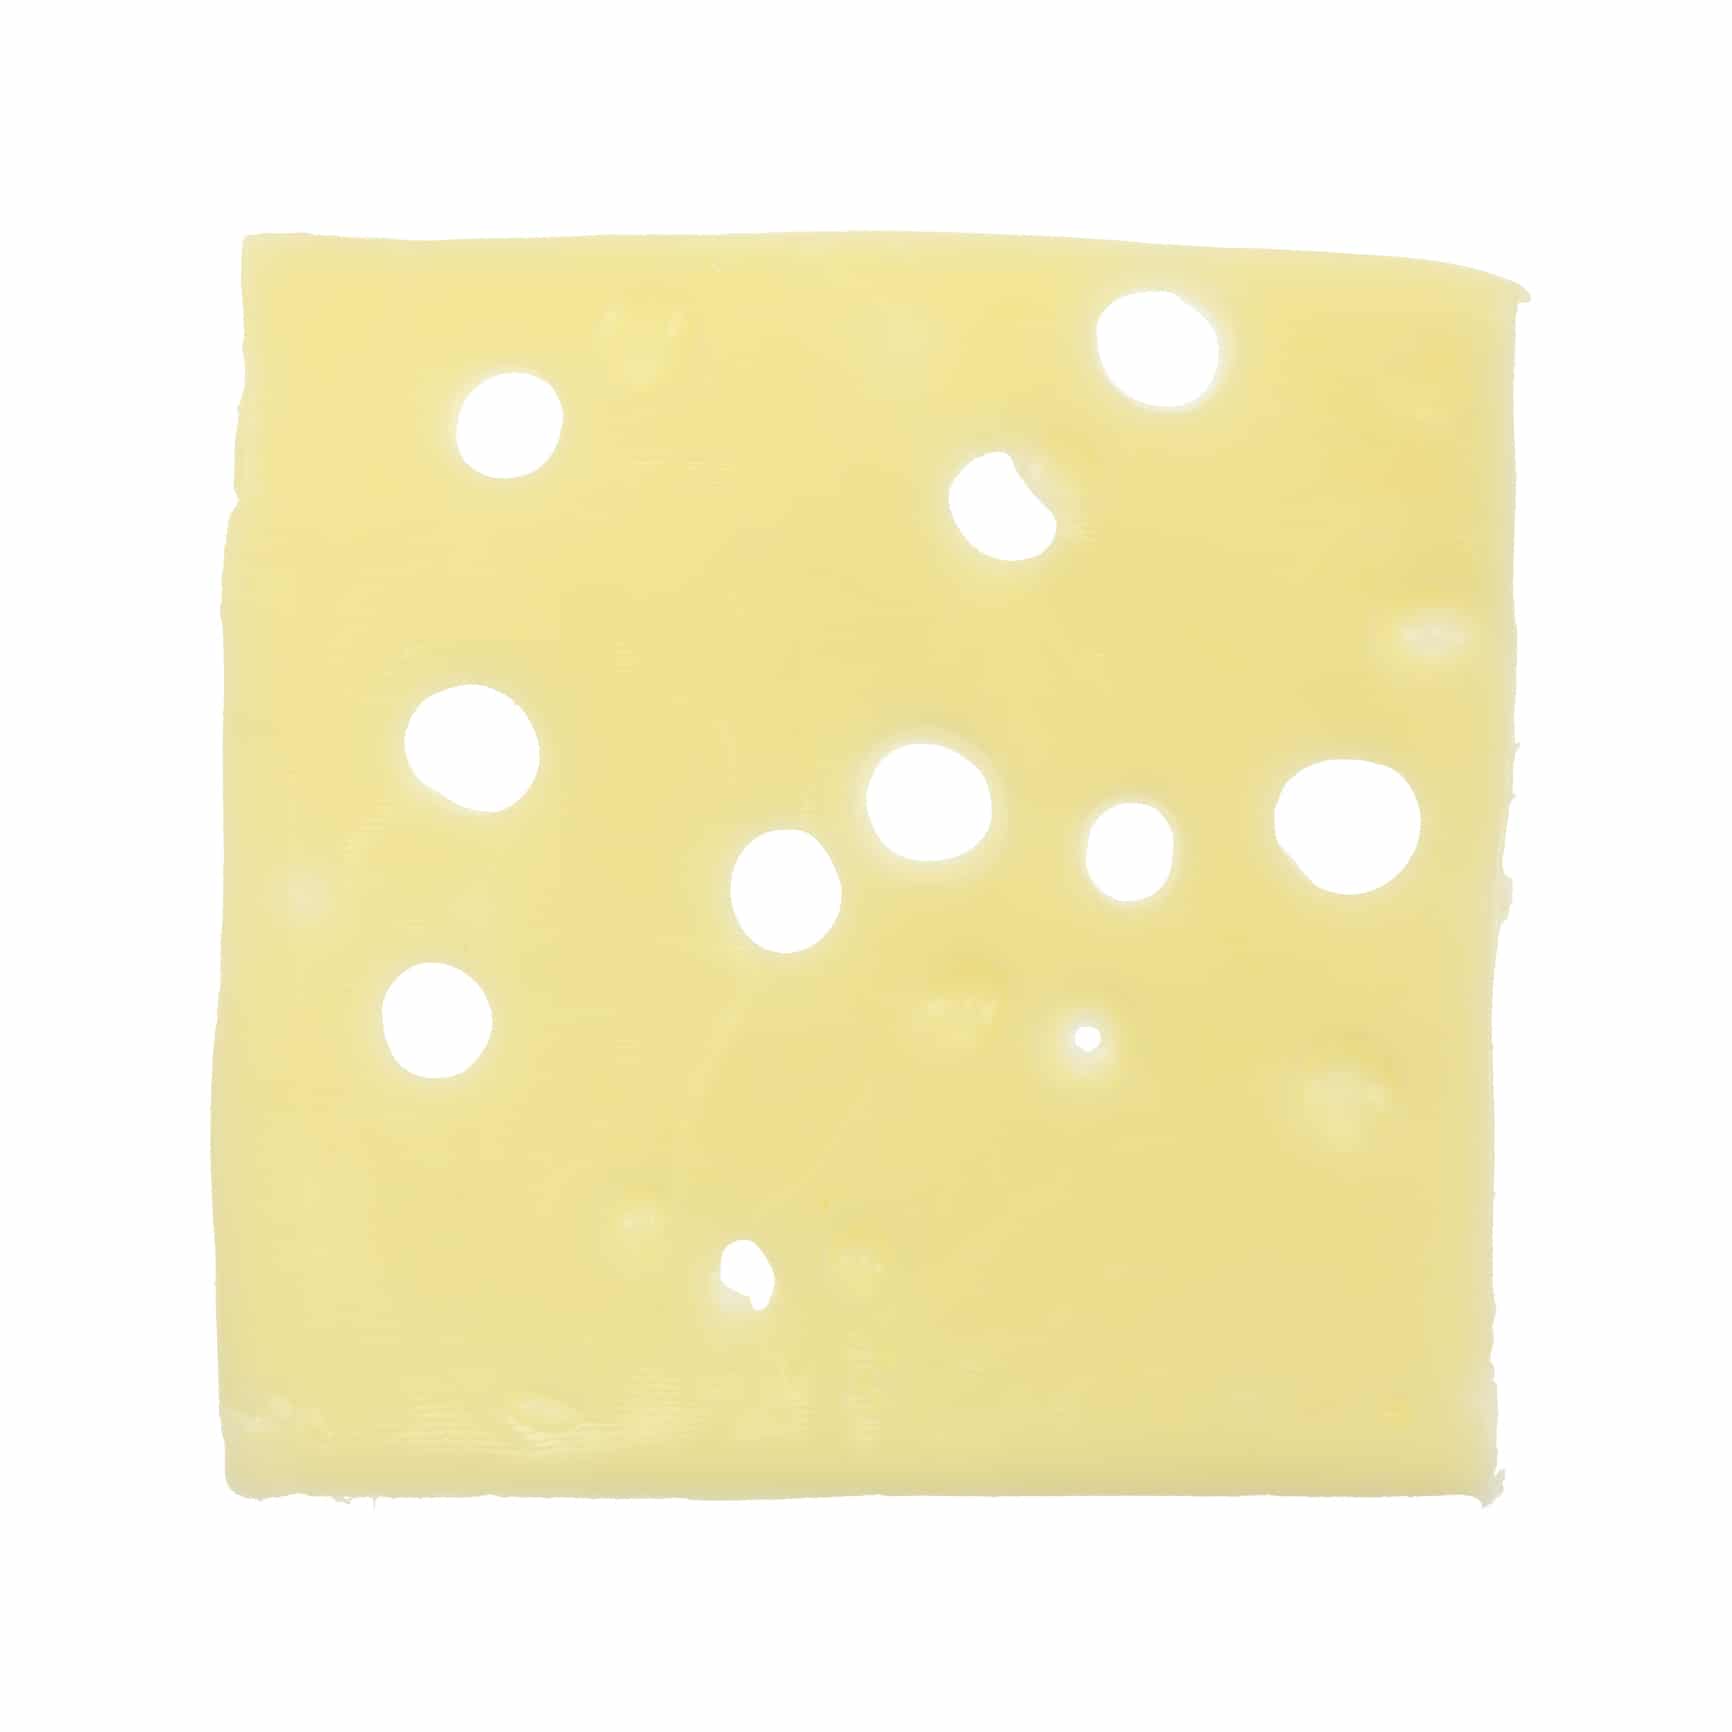 is swiss cheese good for kidney disease